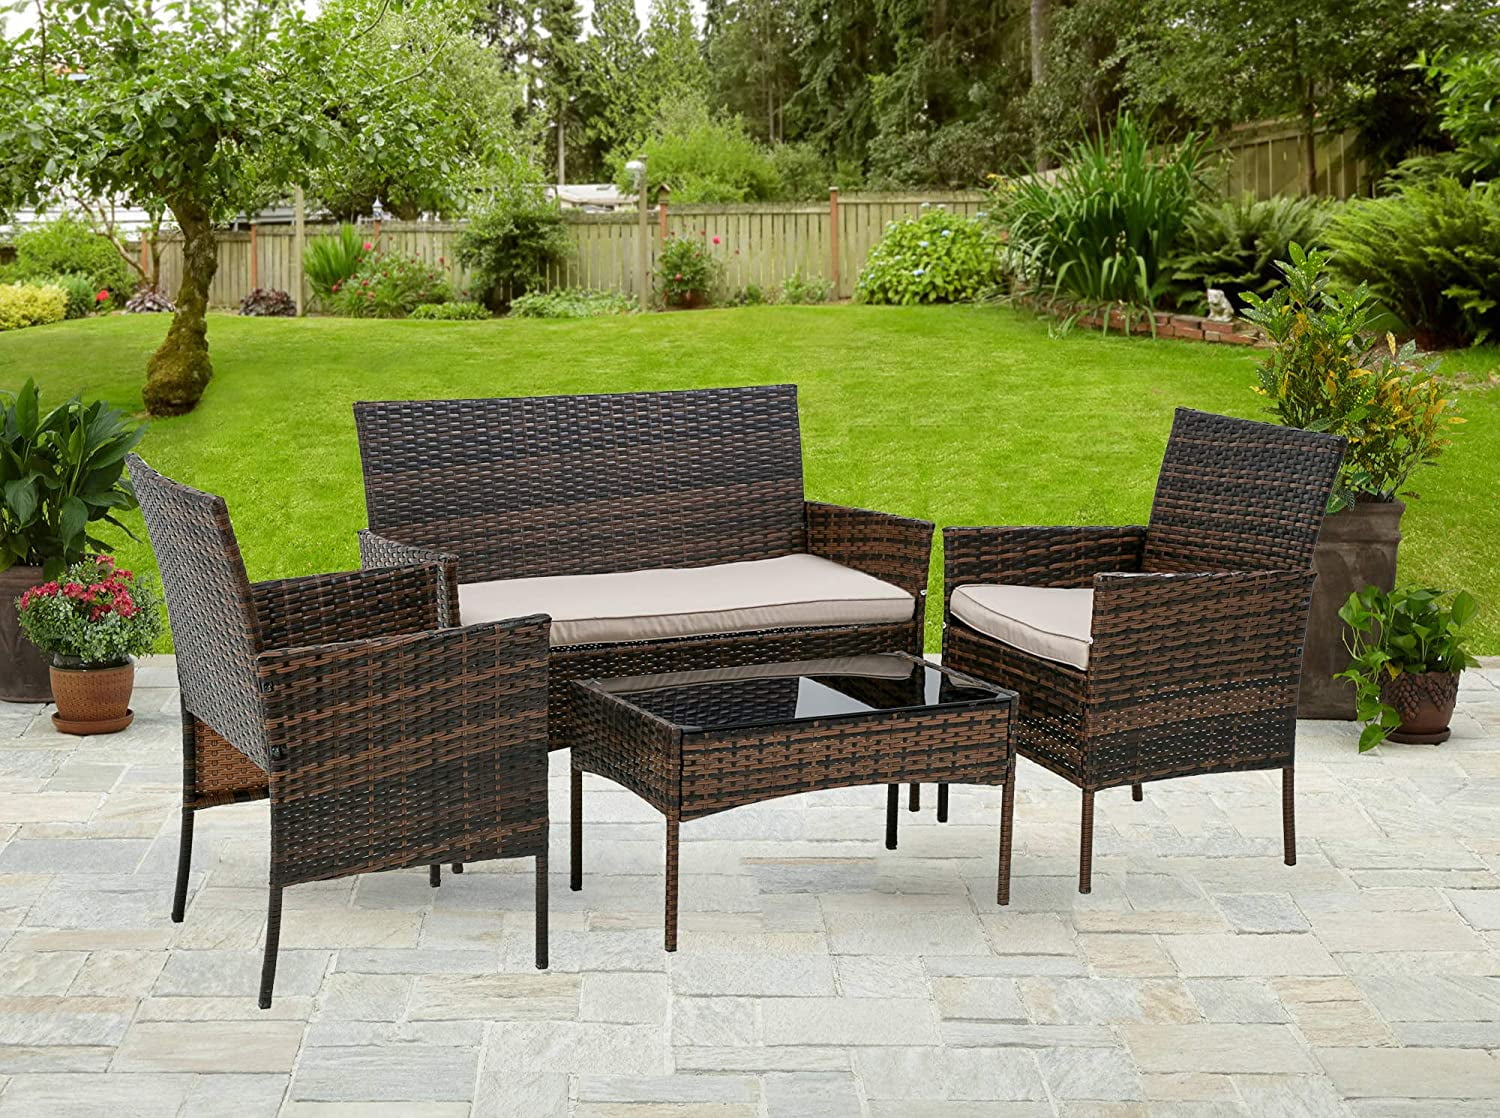 Patio Wicker Chair Furniture Set with Cushions for Courtyard Brown Garden Patio Conversation Set Bistro Set with Tempered Glass Table Tangkula 3 PCS Outdoor Rattan Dining Set Balcony 